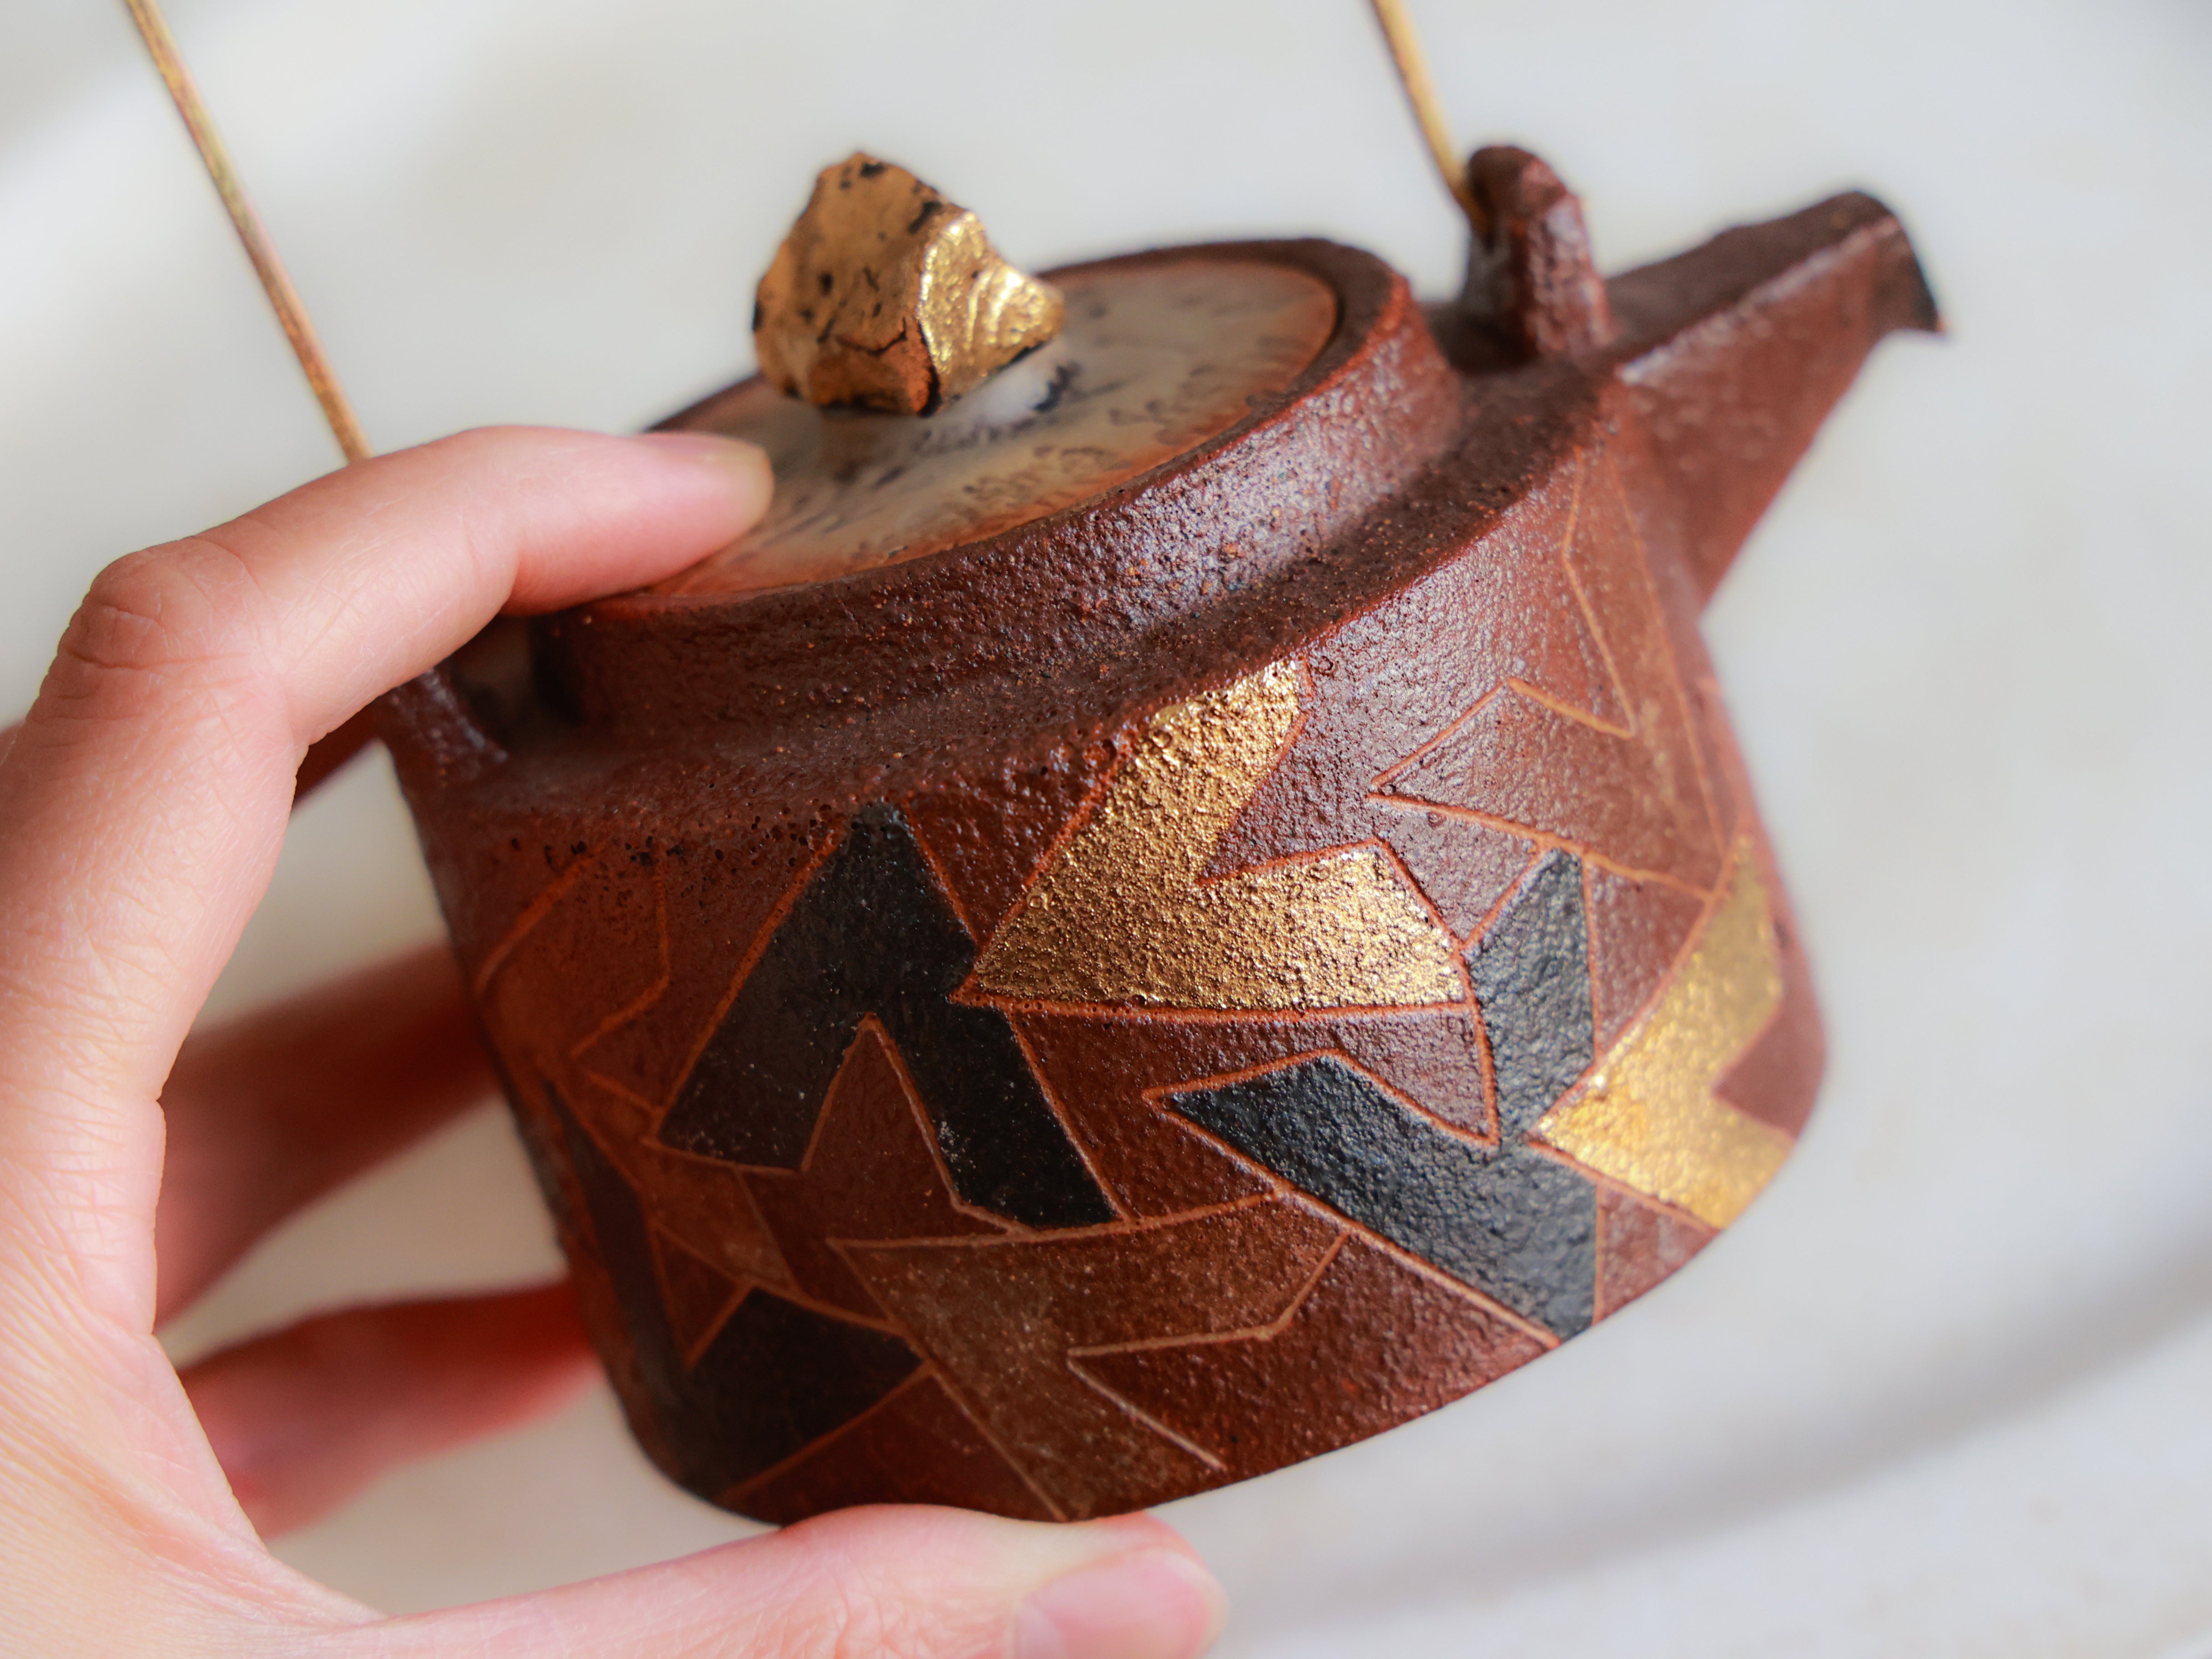 Hand-carved Overhead Teapot